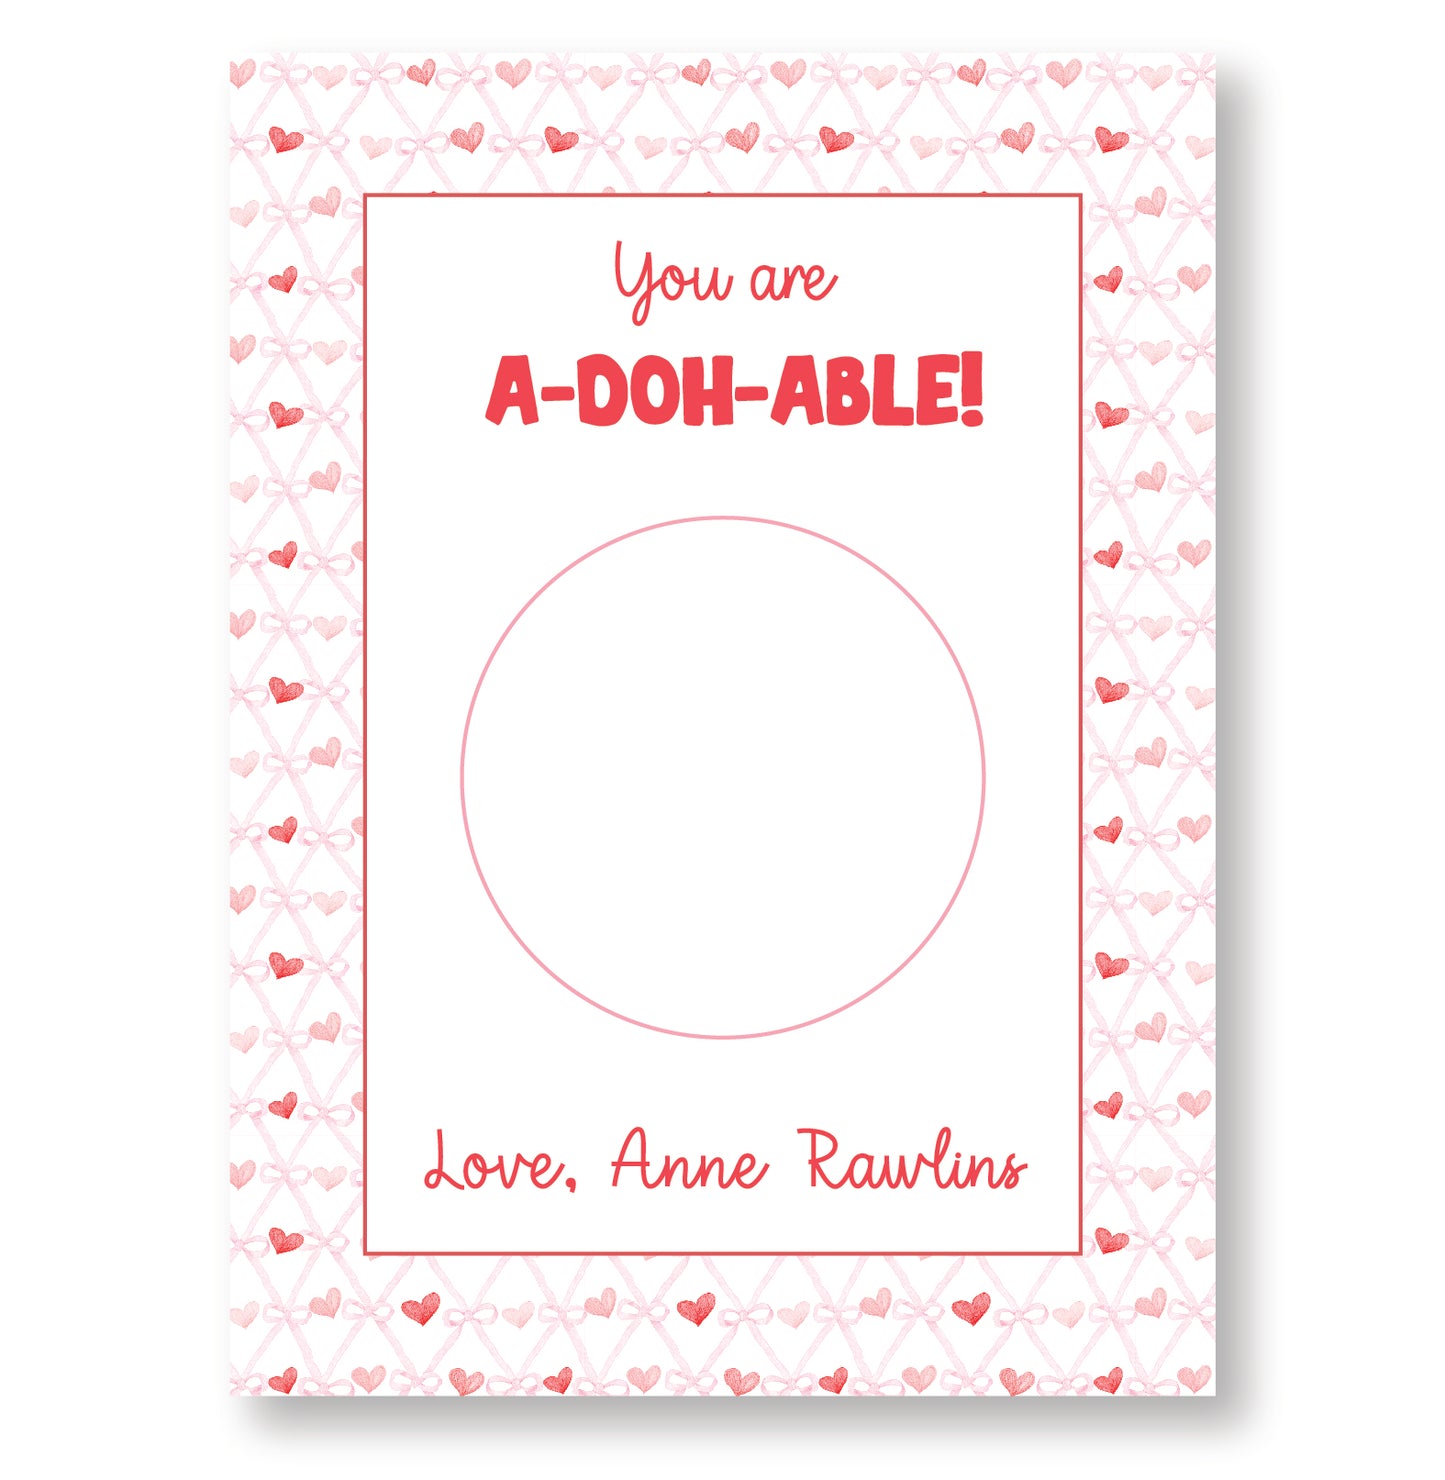 A-Doh-Able Tag Valentine